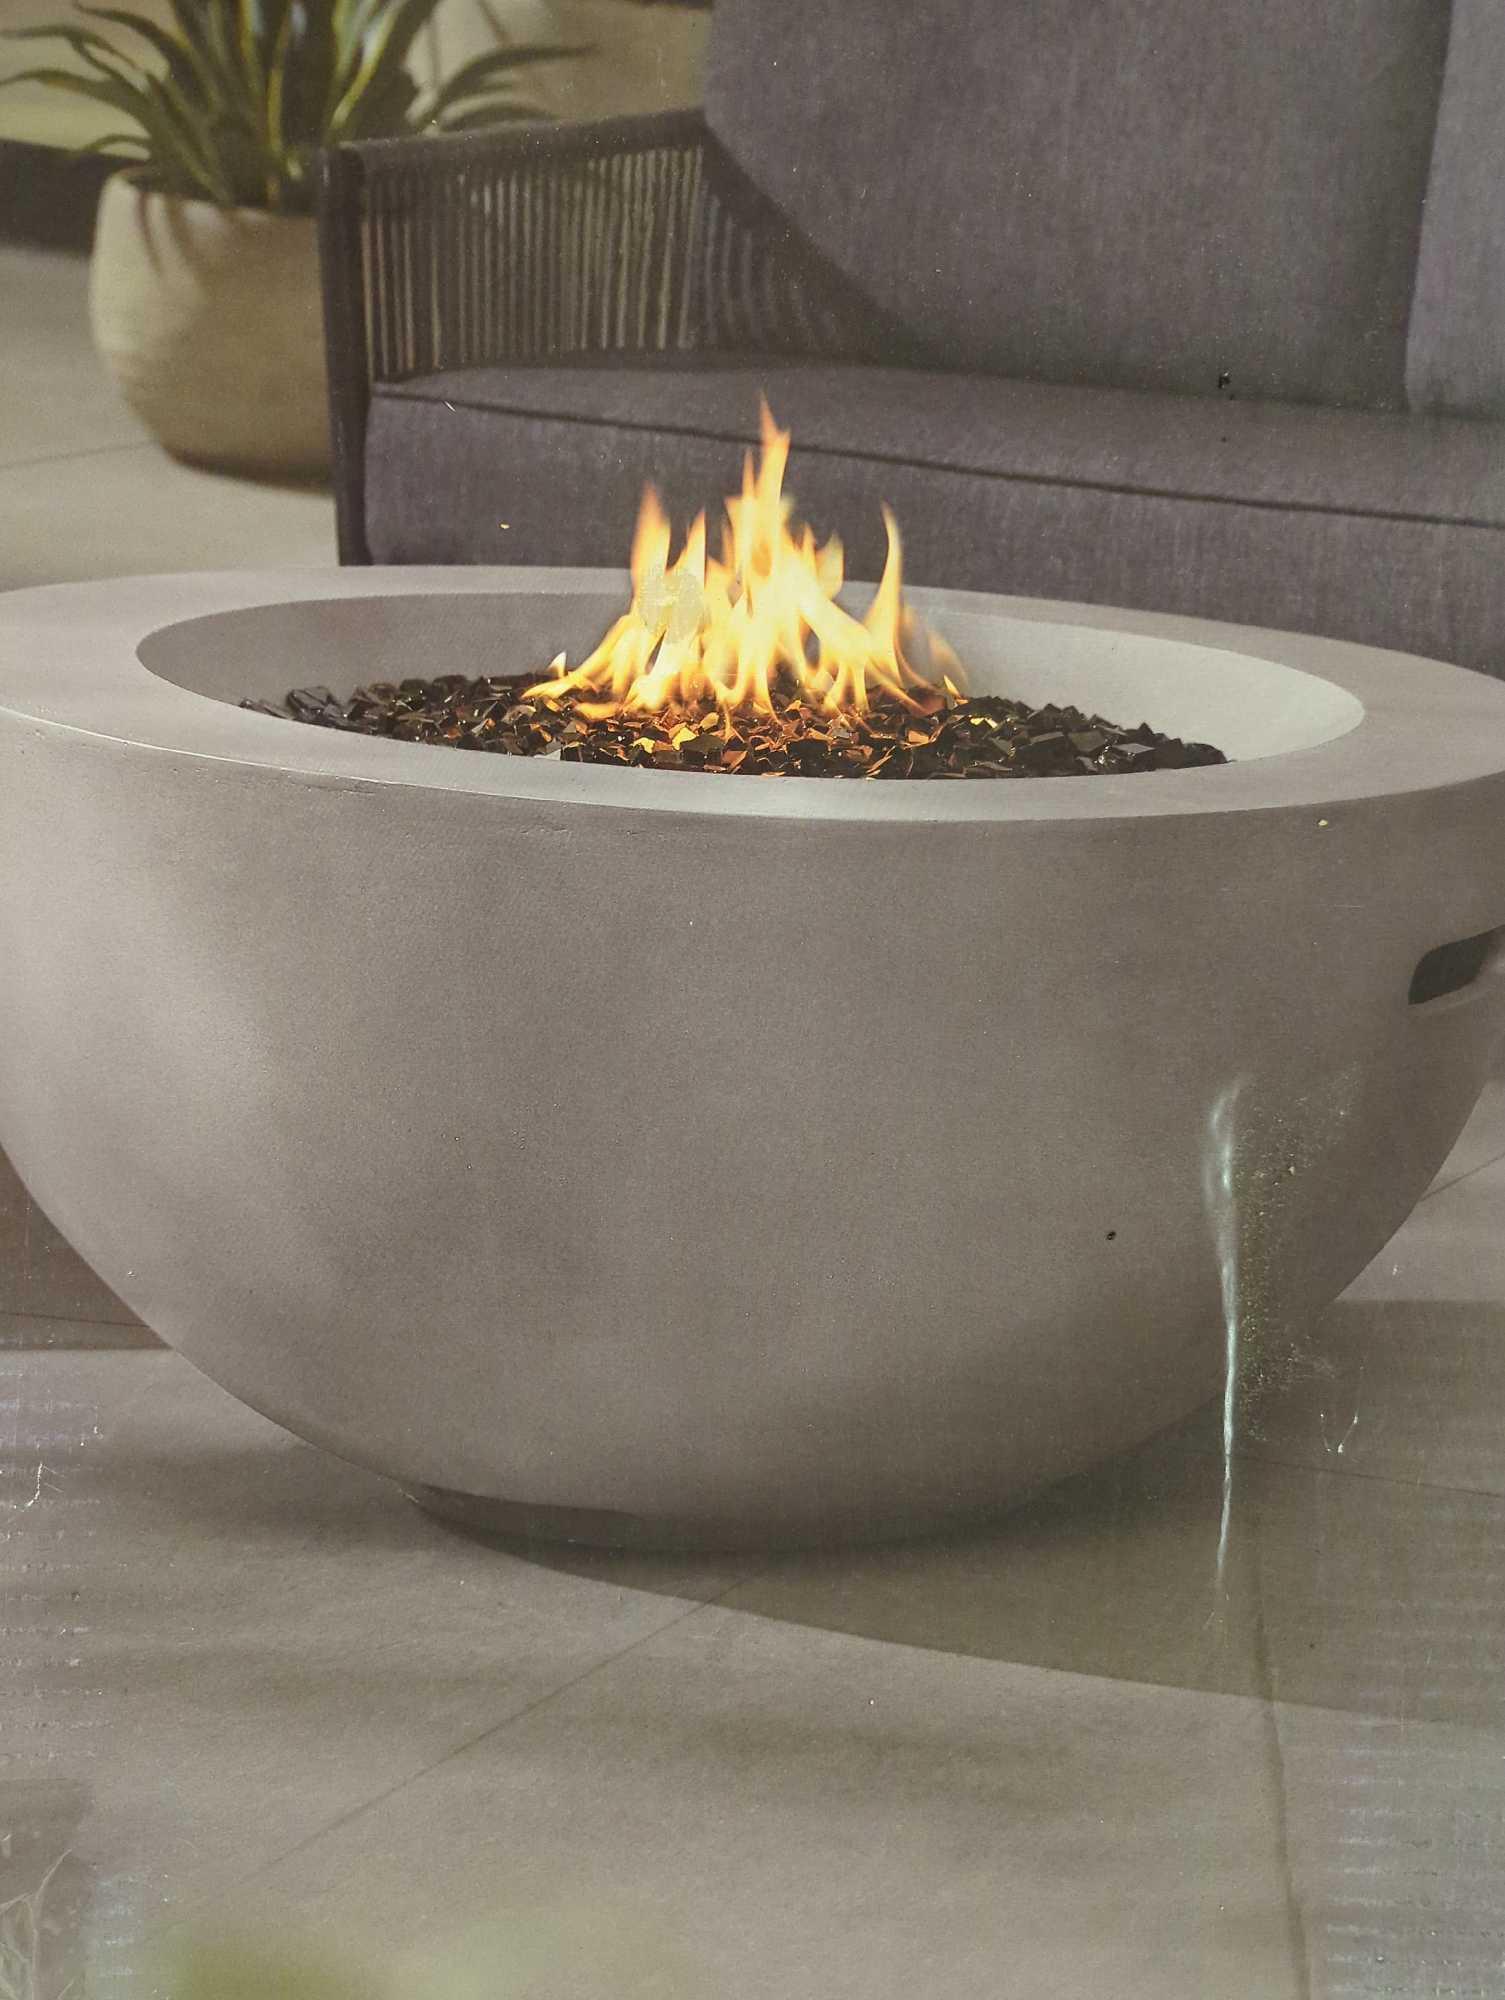 Hampton Bay Grove Park 36 in. x 18 in. Round Concrete Propane Gas Fire Pit, Appears to be New in